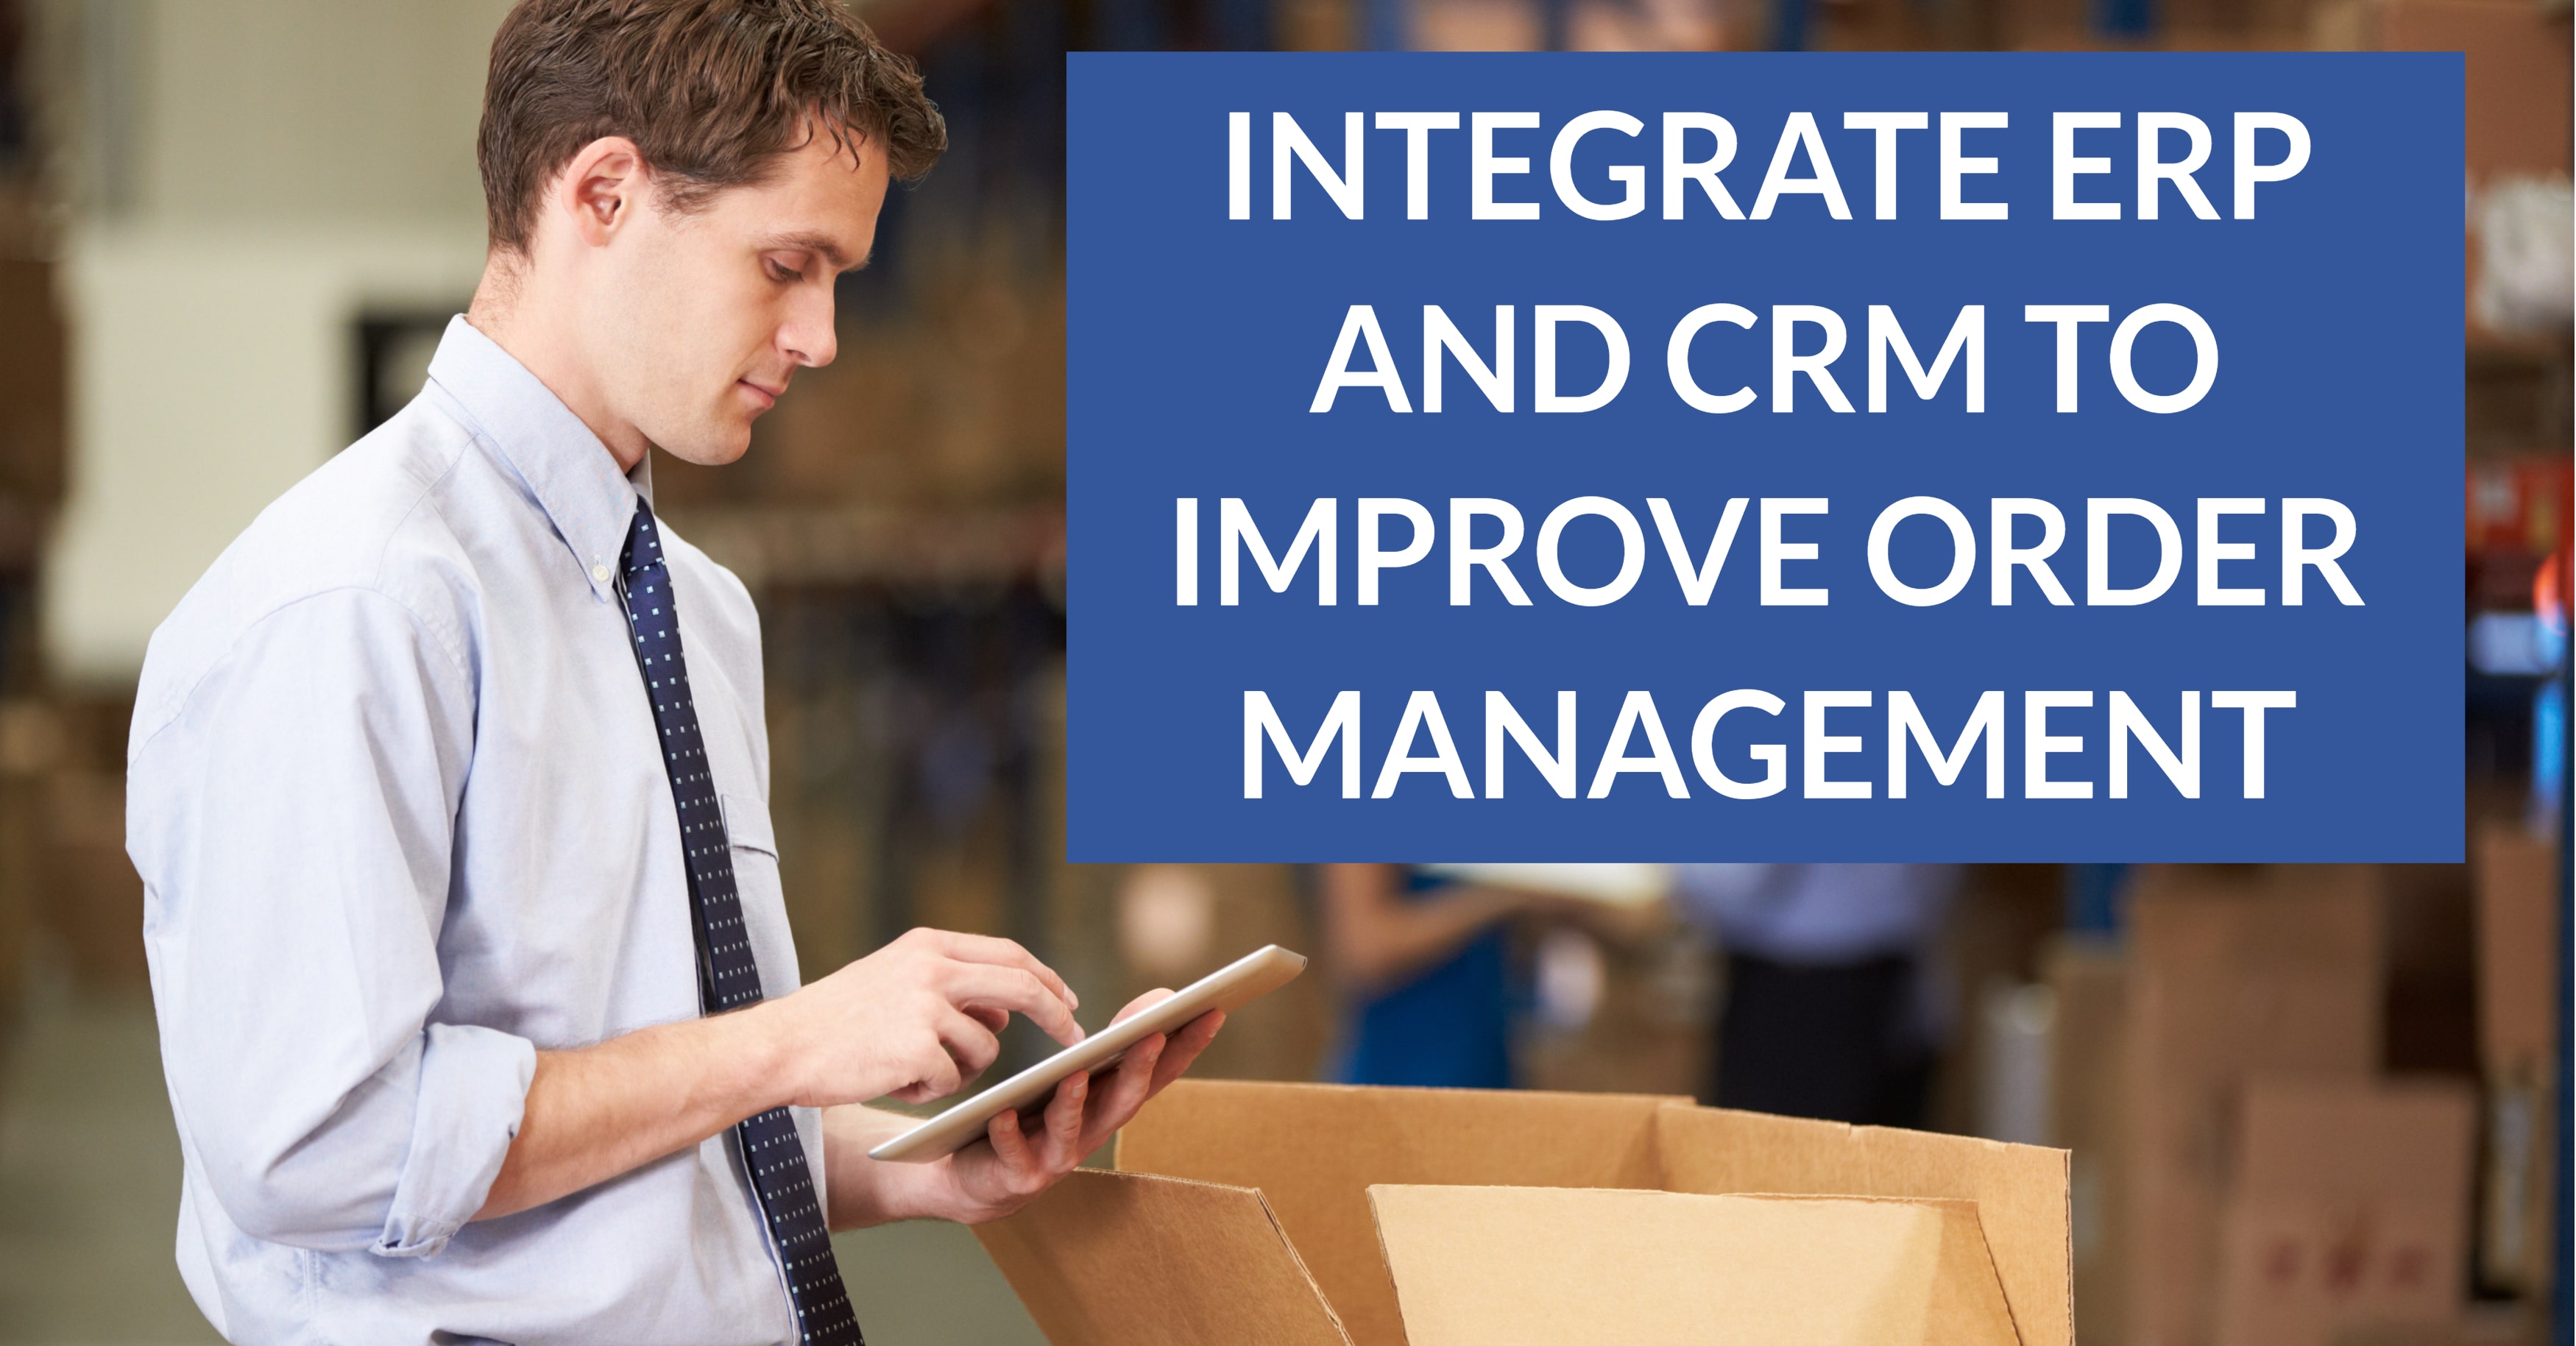 Integrate ERP and CRM to Improve Order Management